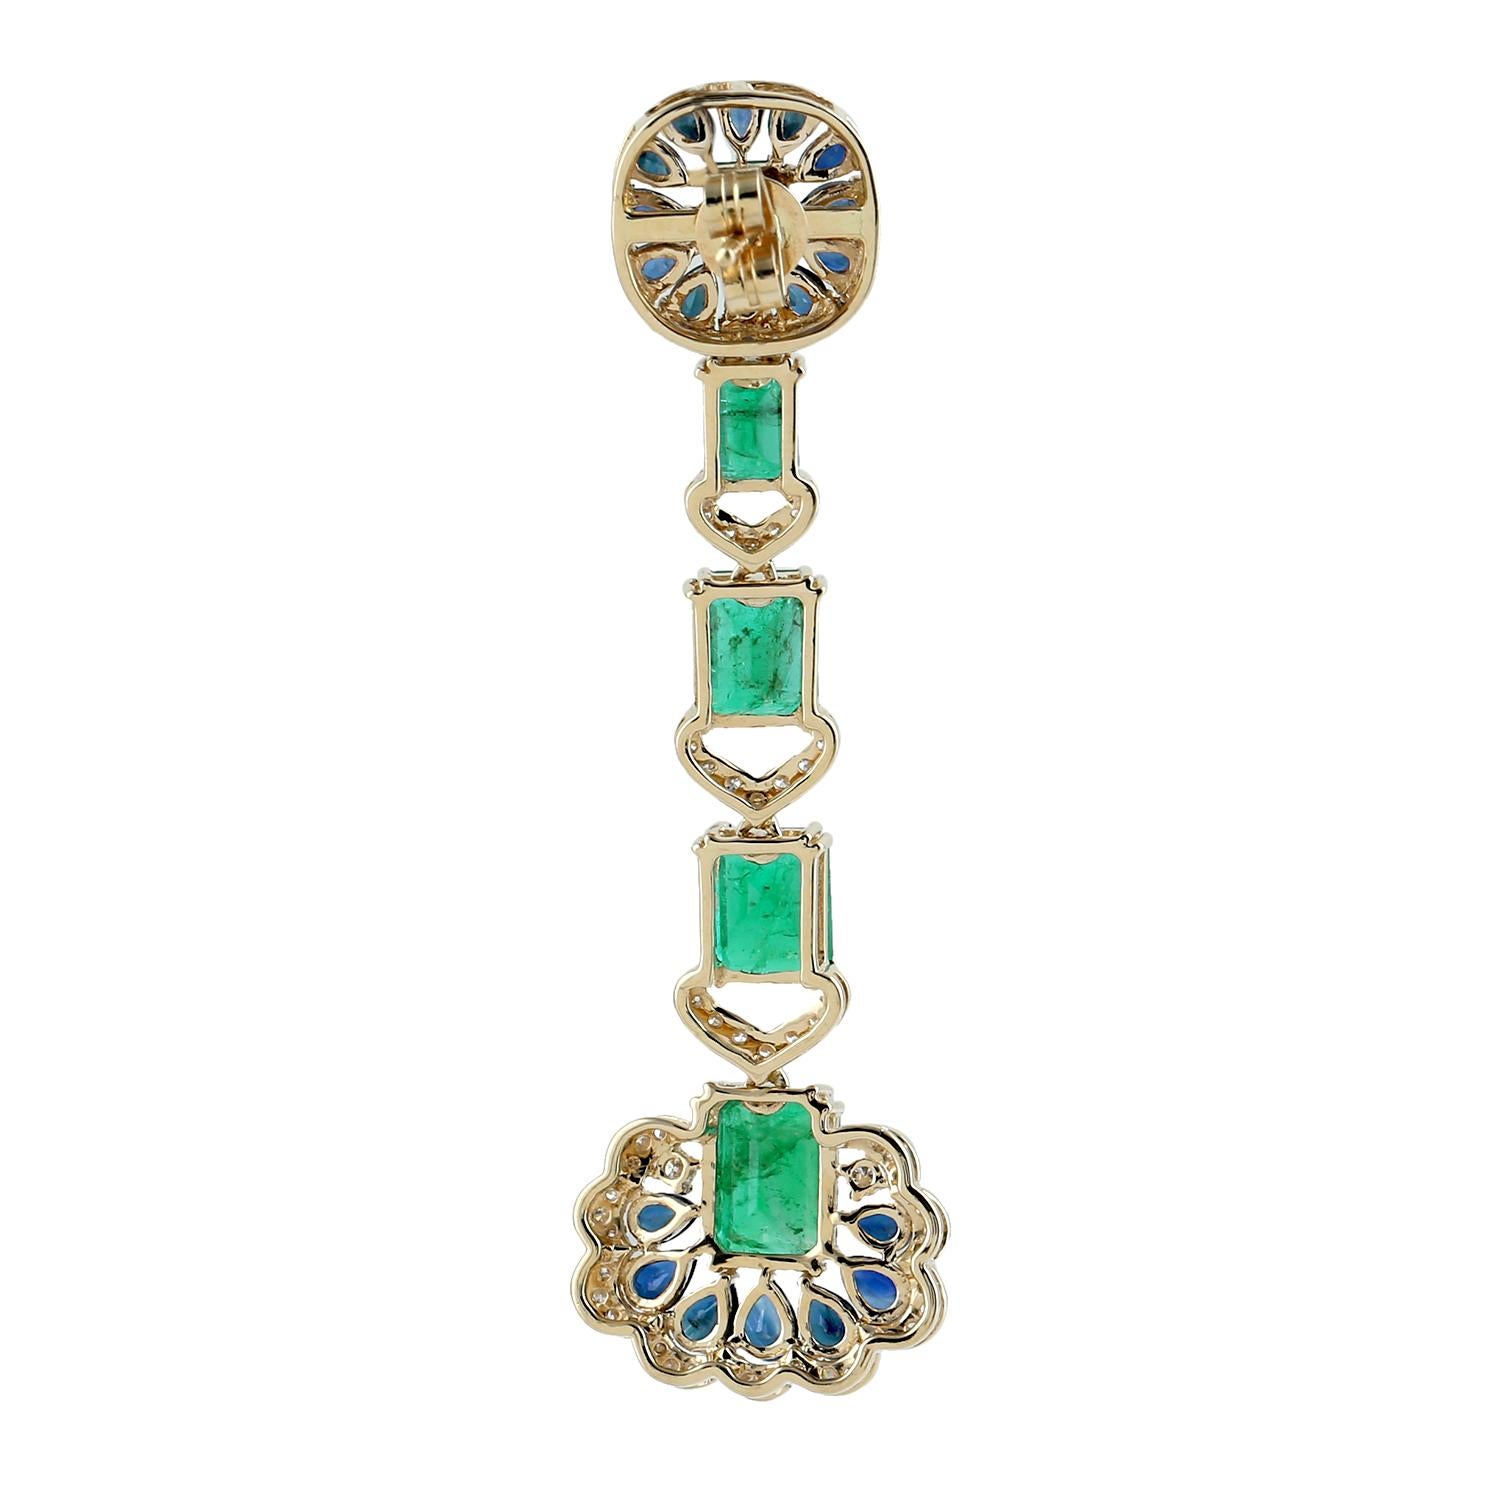 Cast from 18-karat gold.  These beautiful earrings are hand set with 11.05 carats emerald, 6.15 carats blue sapphire and 1.1 carats of sparkling diamonds.

FOLLOW  MEGHNA JEWELS storefront to view the latest collection & exclusive pieces.  Meghna